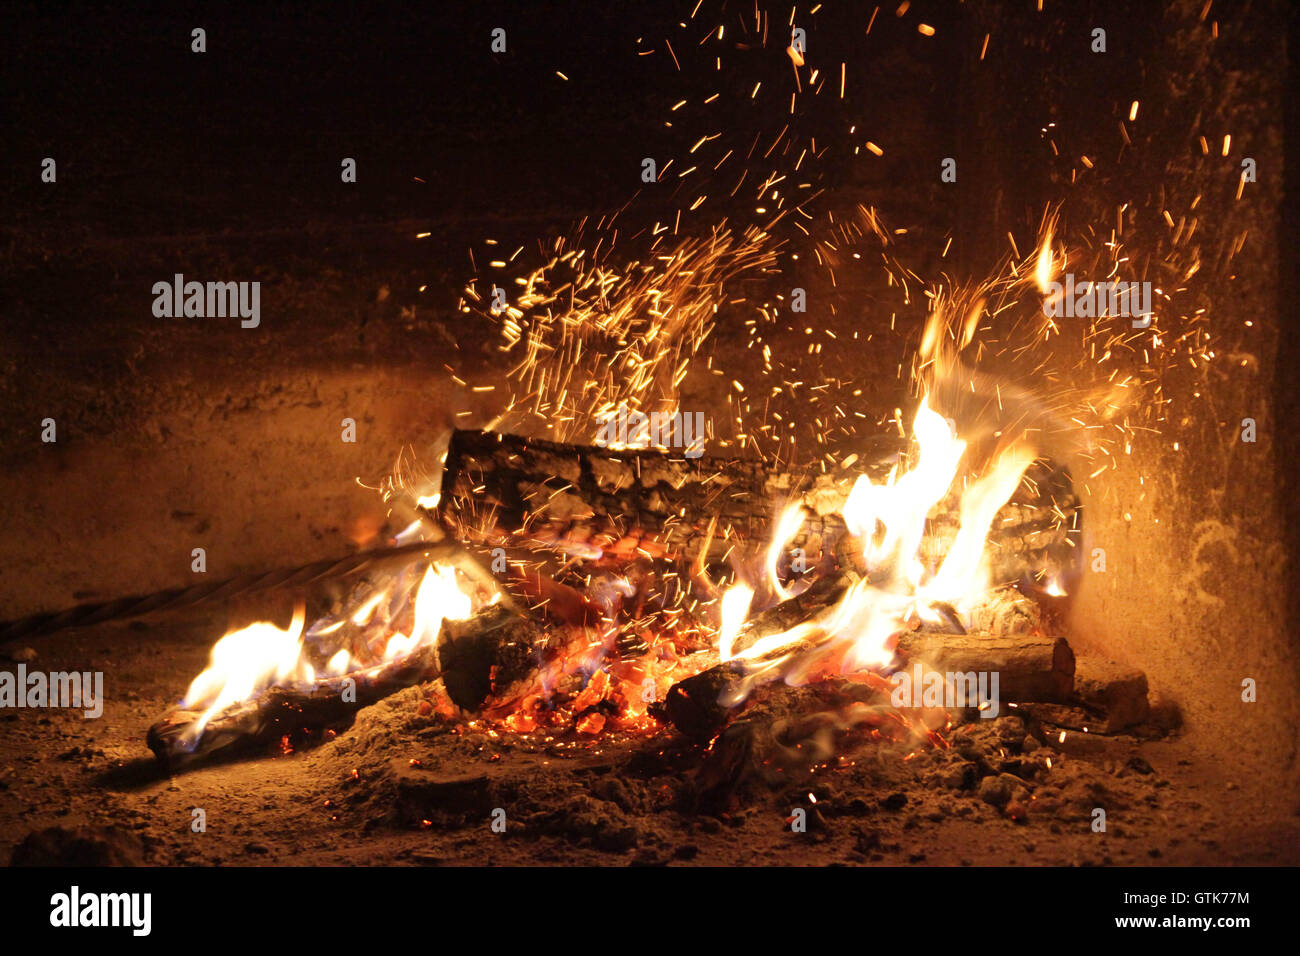 Sparkling open fire Stock Photo